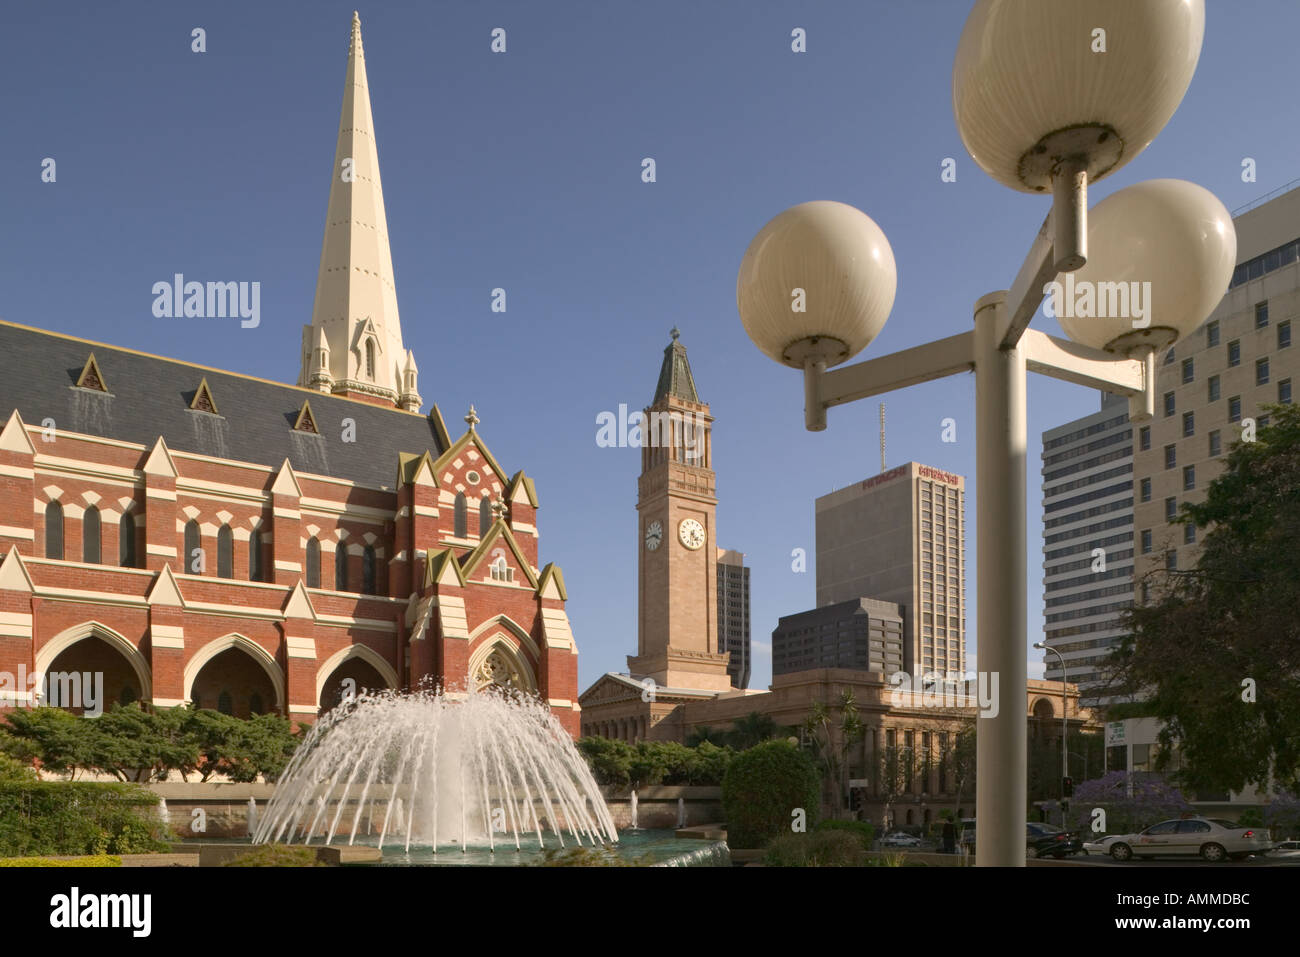 View of City Hall in King George Square, Brisbane with Albert Street Union Church in the foreground. Stock Photo